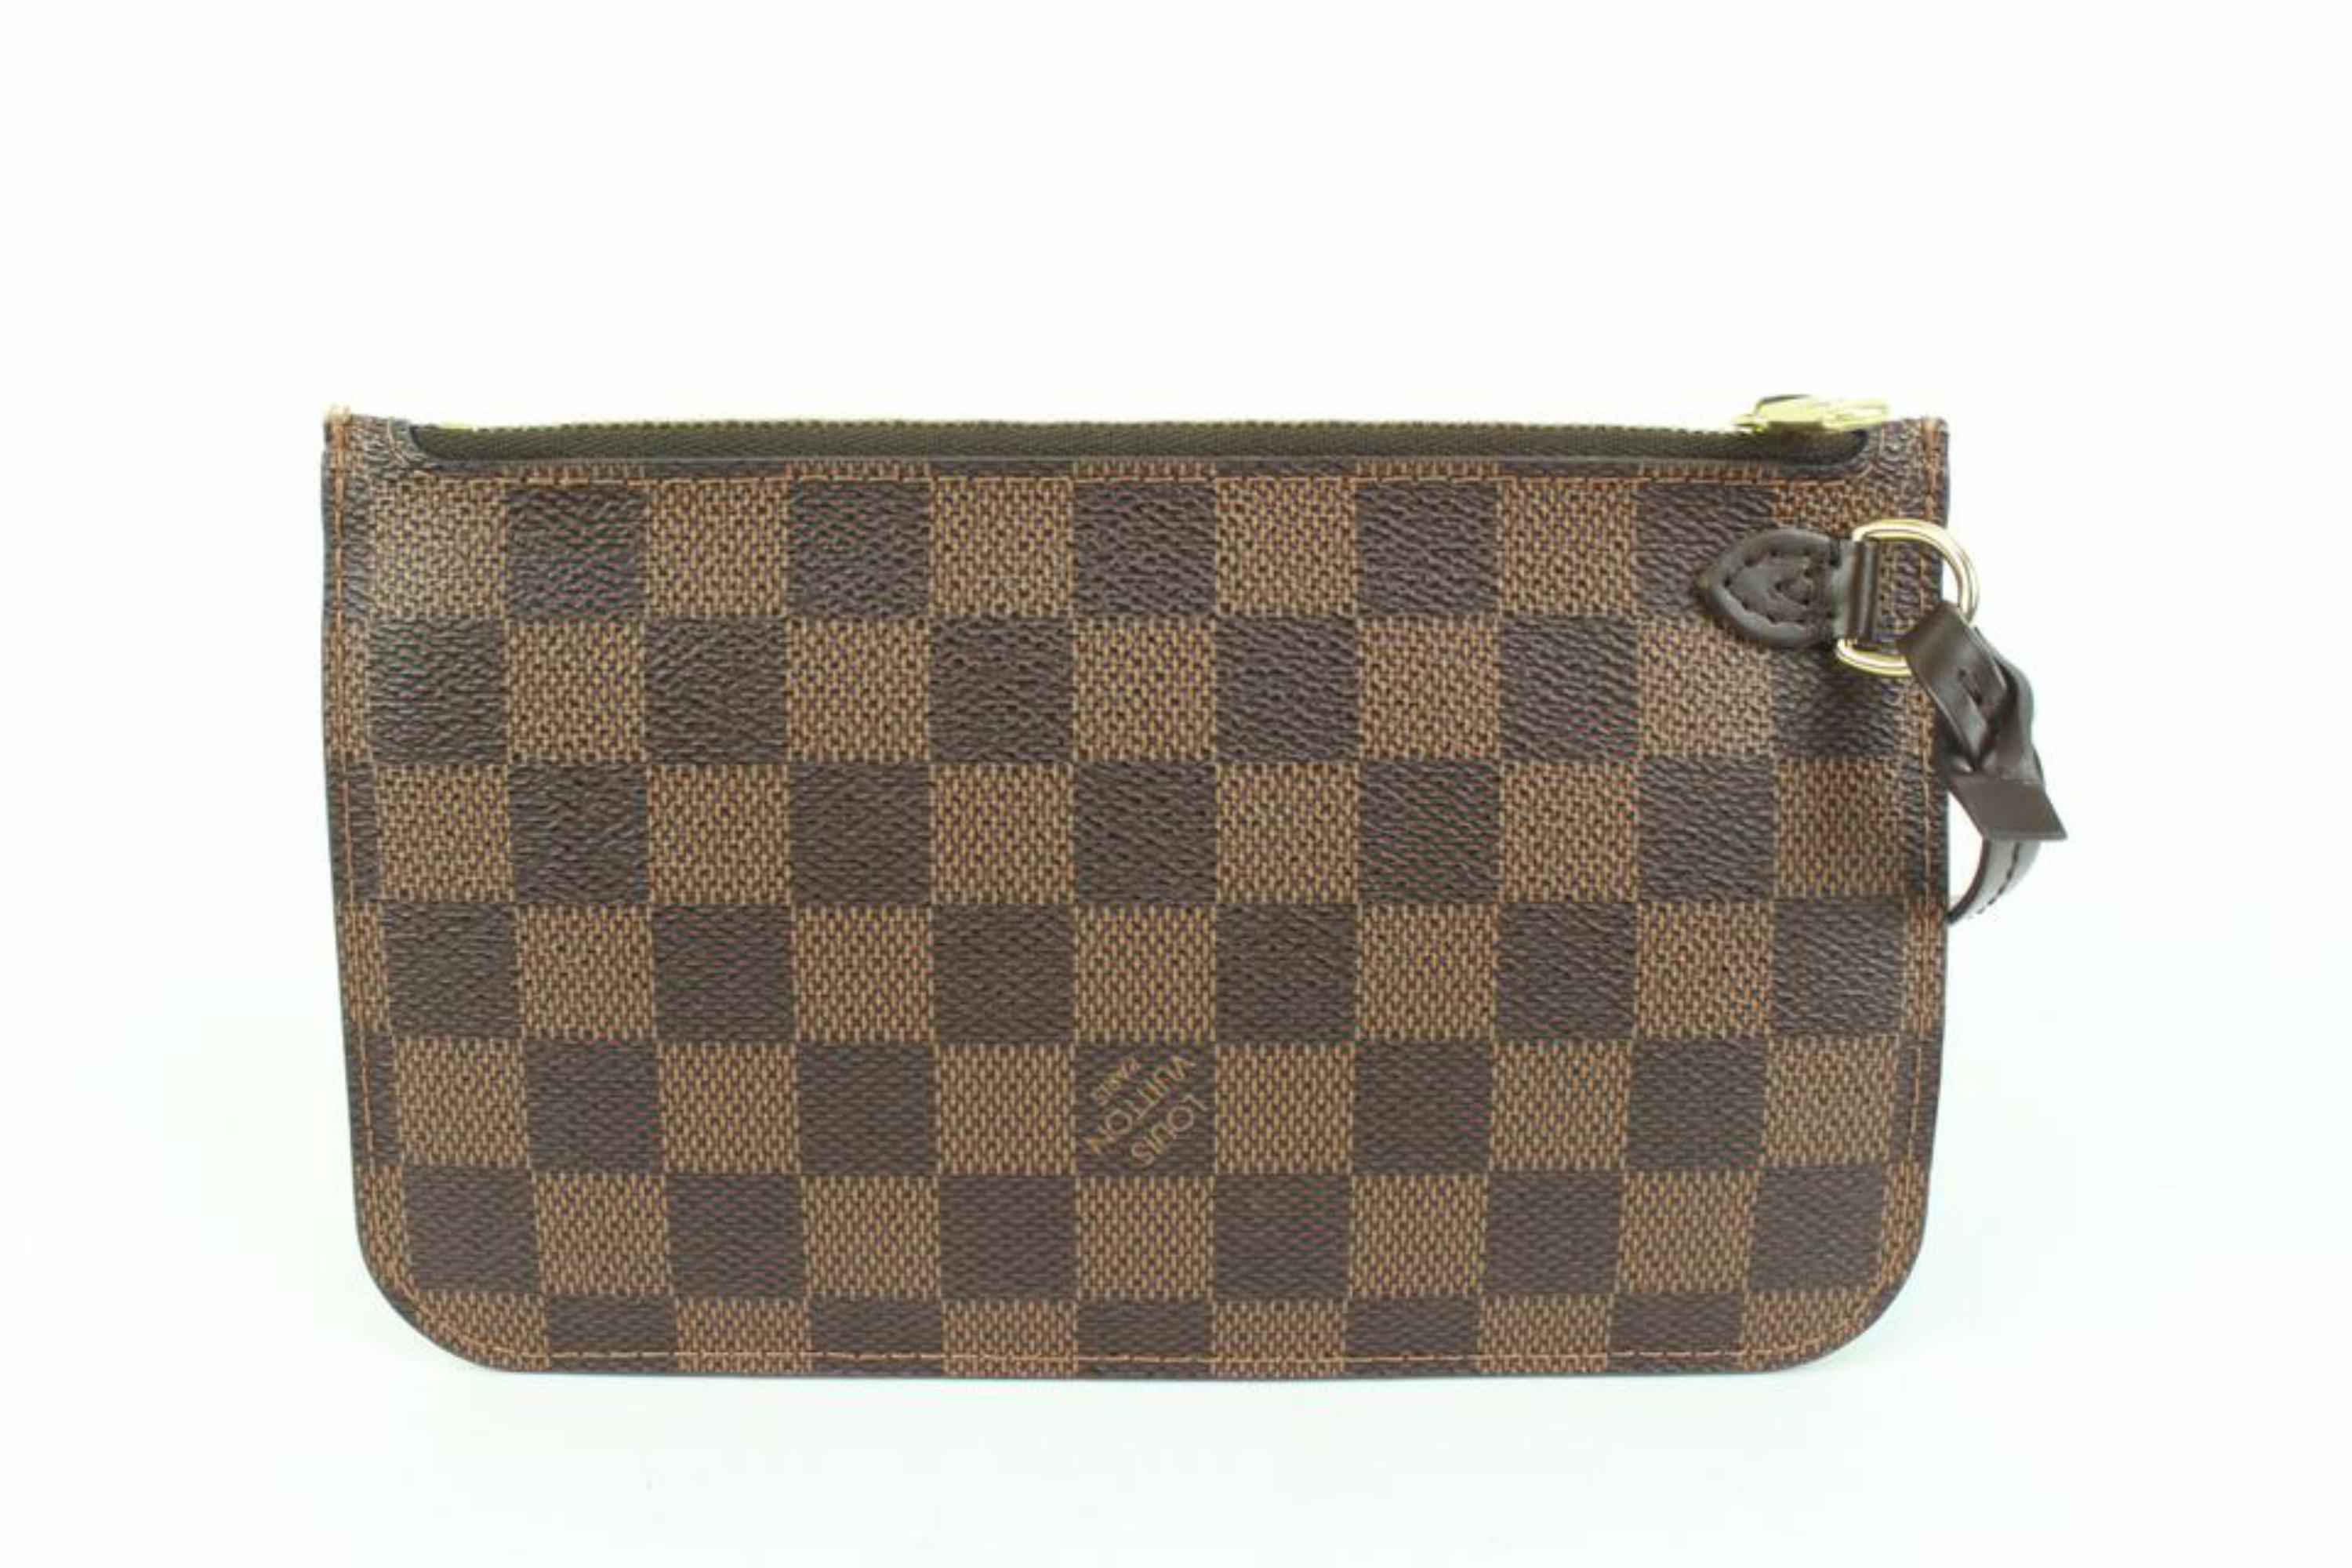 Louis Vuitton Damier Ebene Neverfull Pochette PM Wristlet Pouch 41lk66 In Excellent Condition For Sale In Dix hills, NY